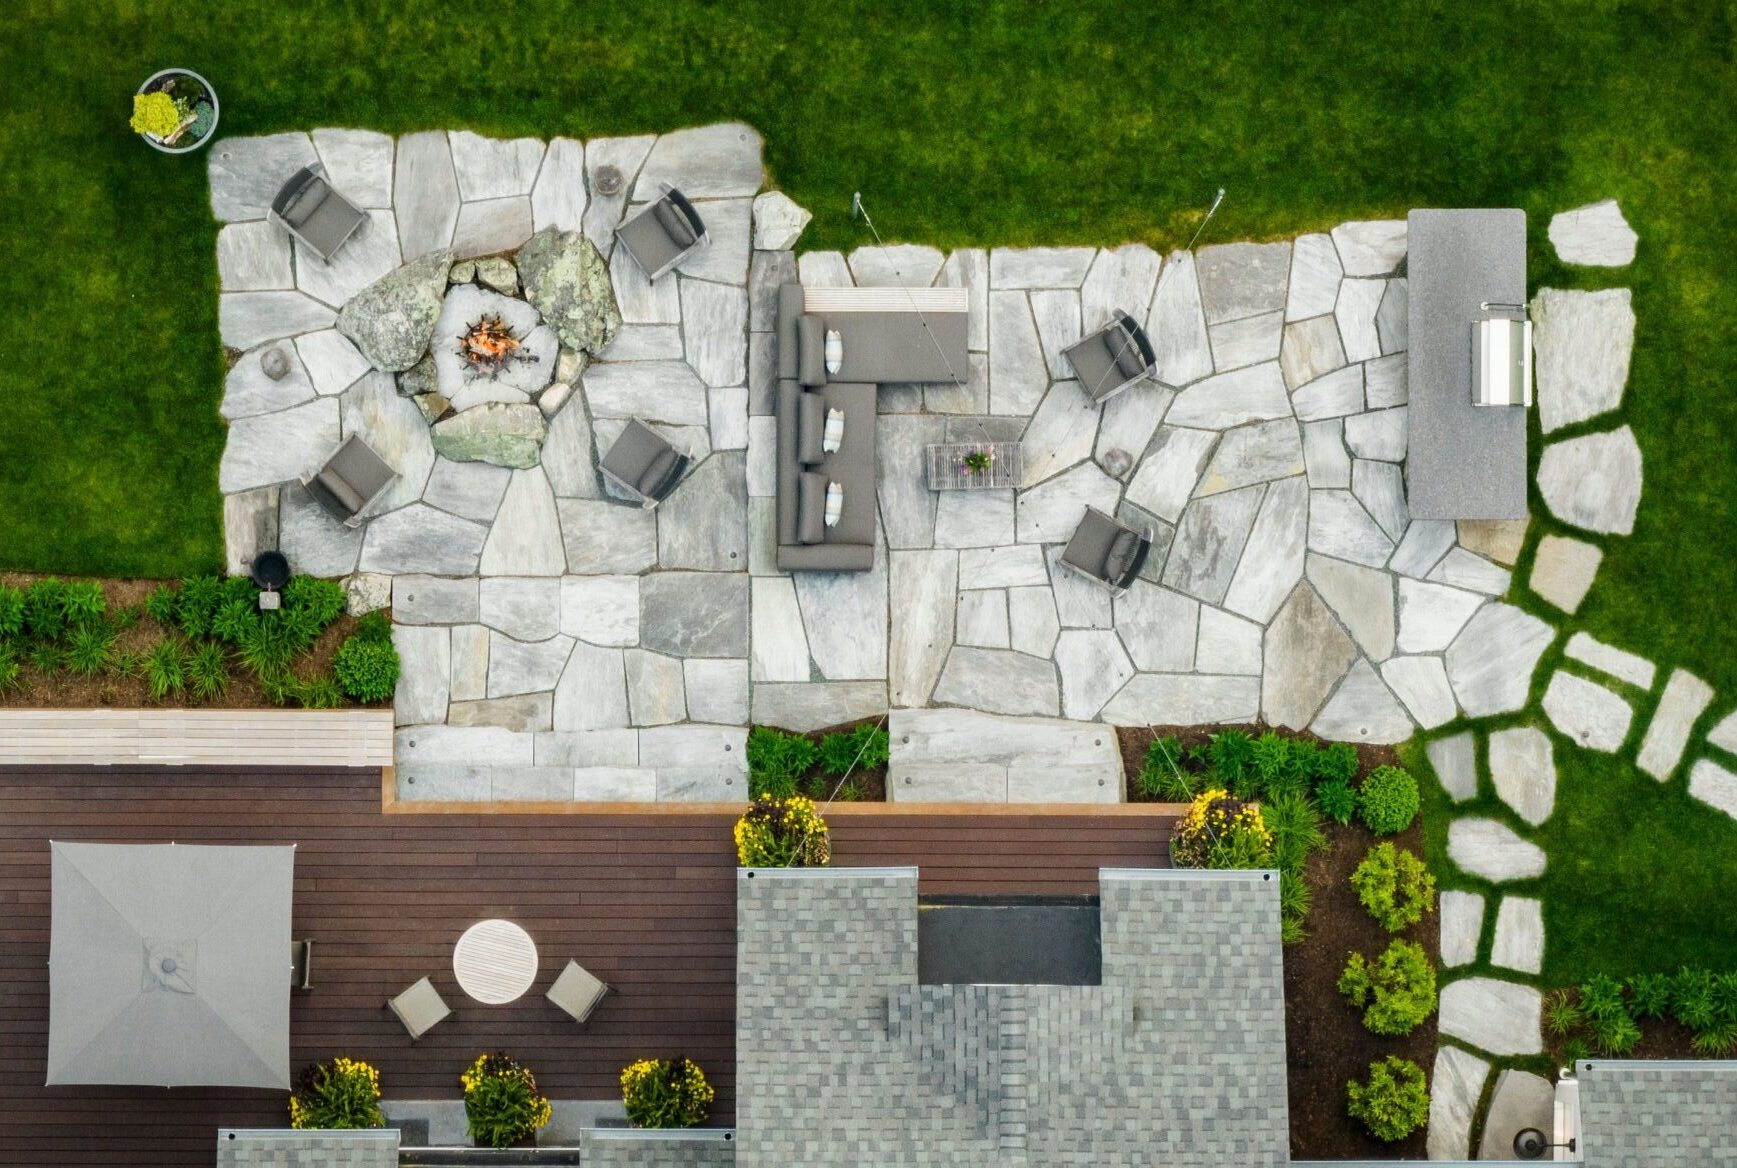 An aerial view of a landscaped backyard featuring a stone patio with a fire pit, outdoor furniture, green lawn, and structured garden beds.